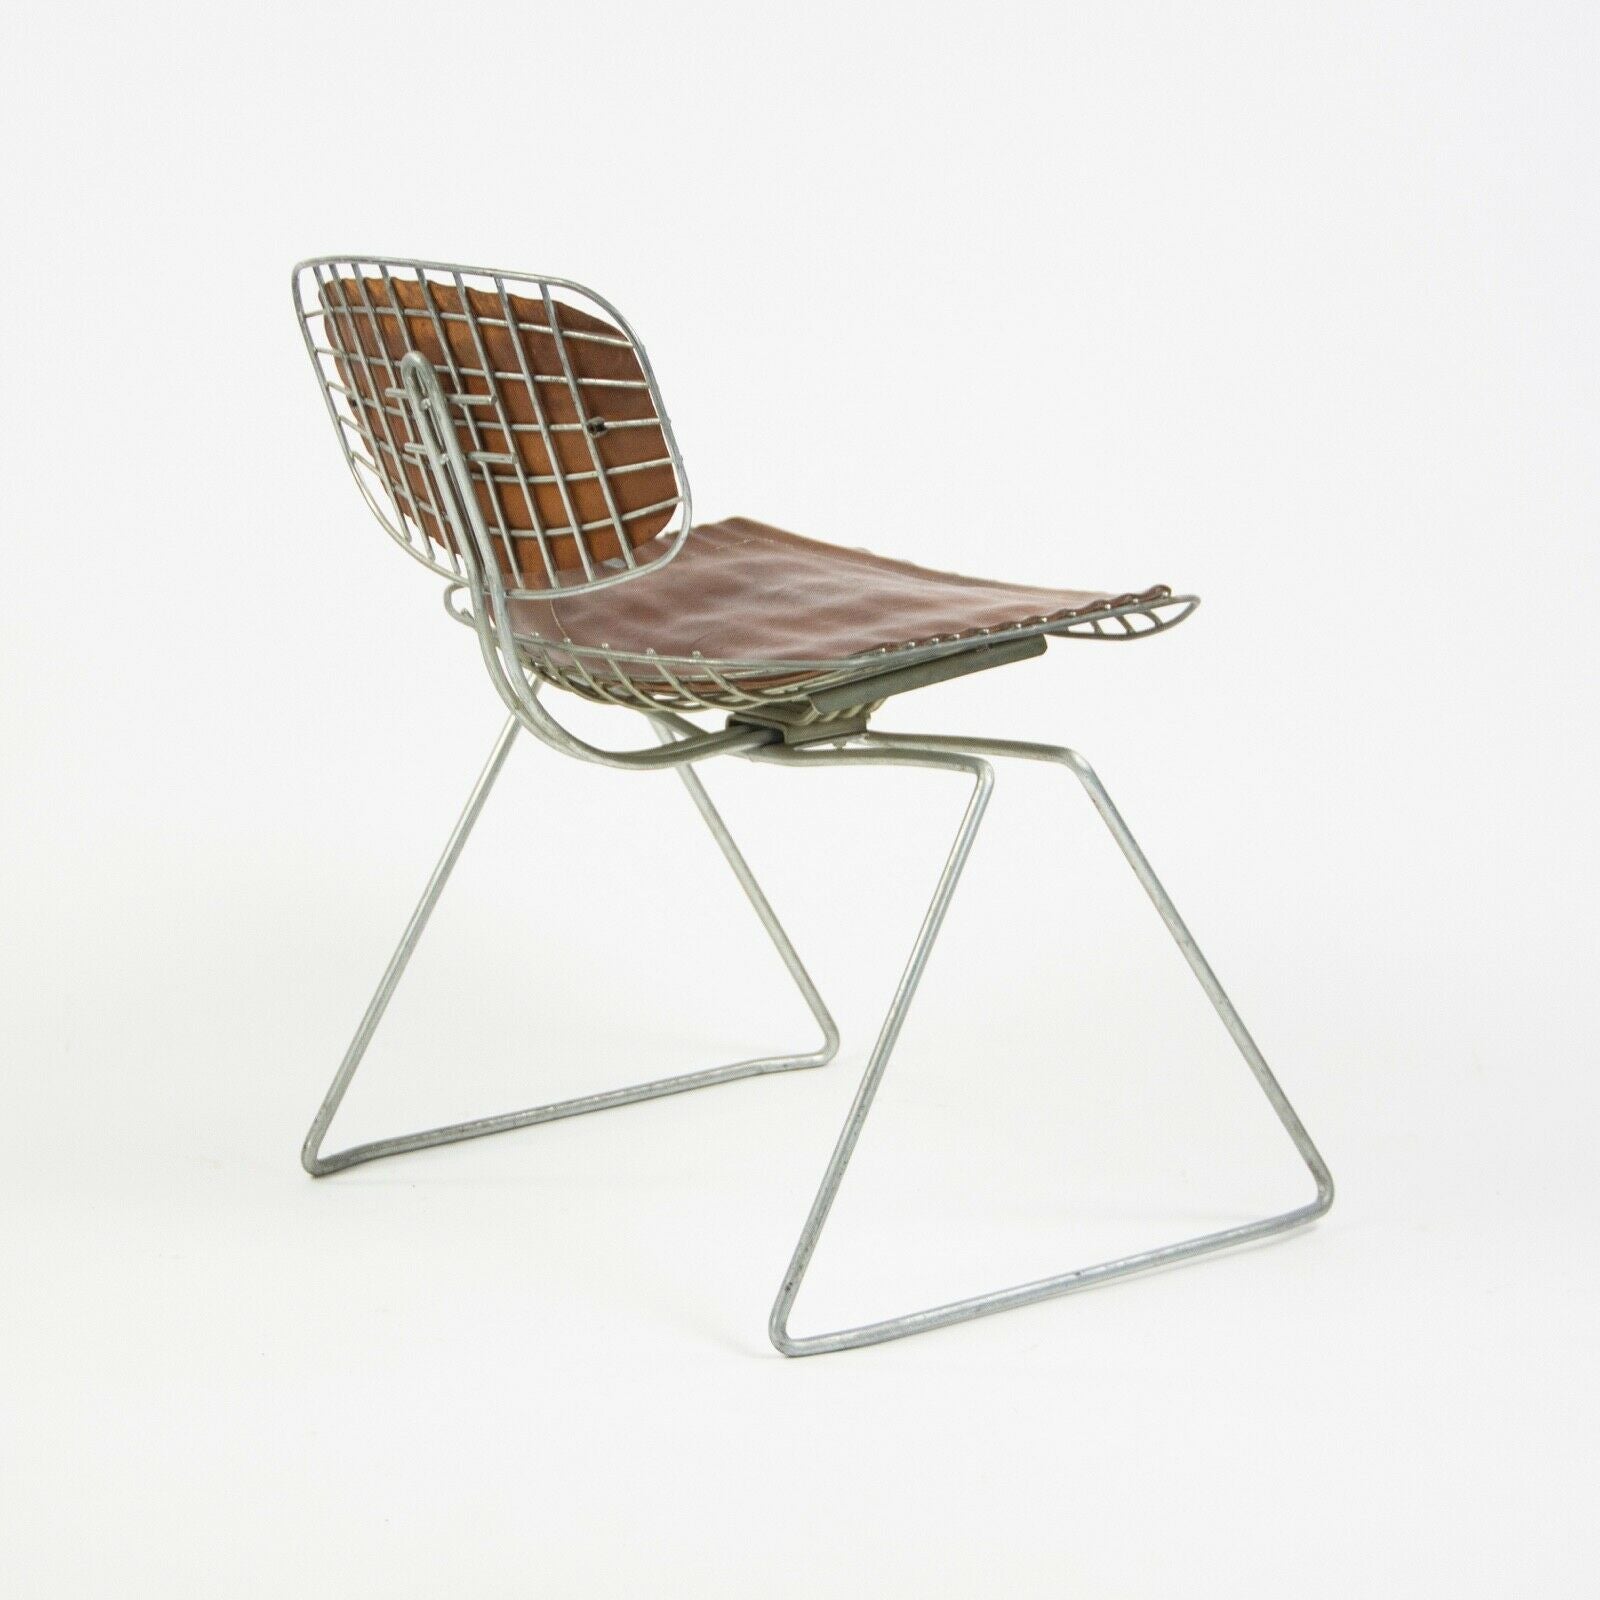 SOLD 1976 Michel Cadestin & Georges Laurent Beaubourg Chair Teda France for Centre Pompidou